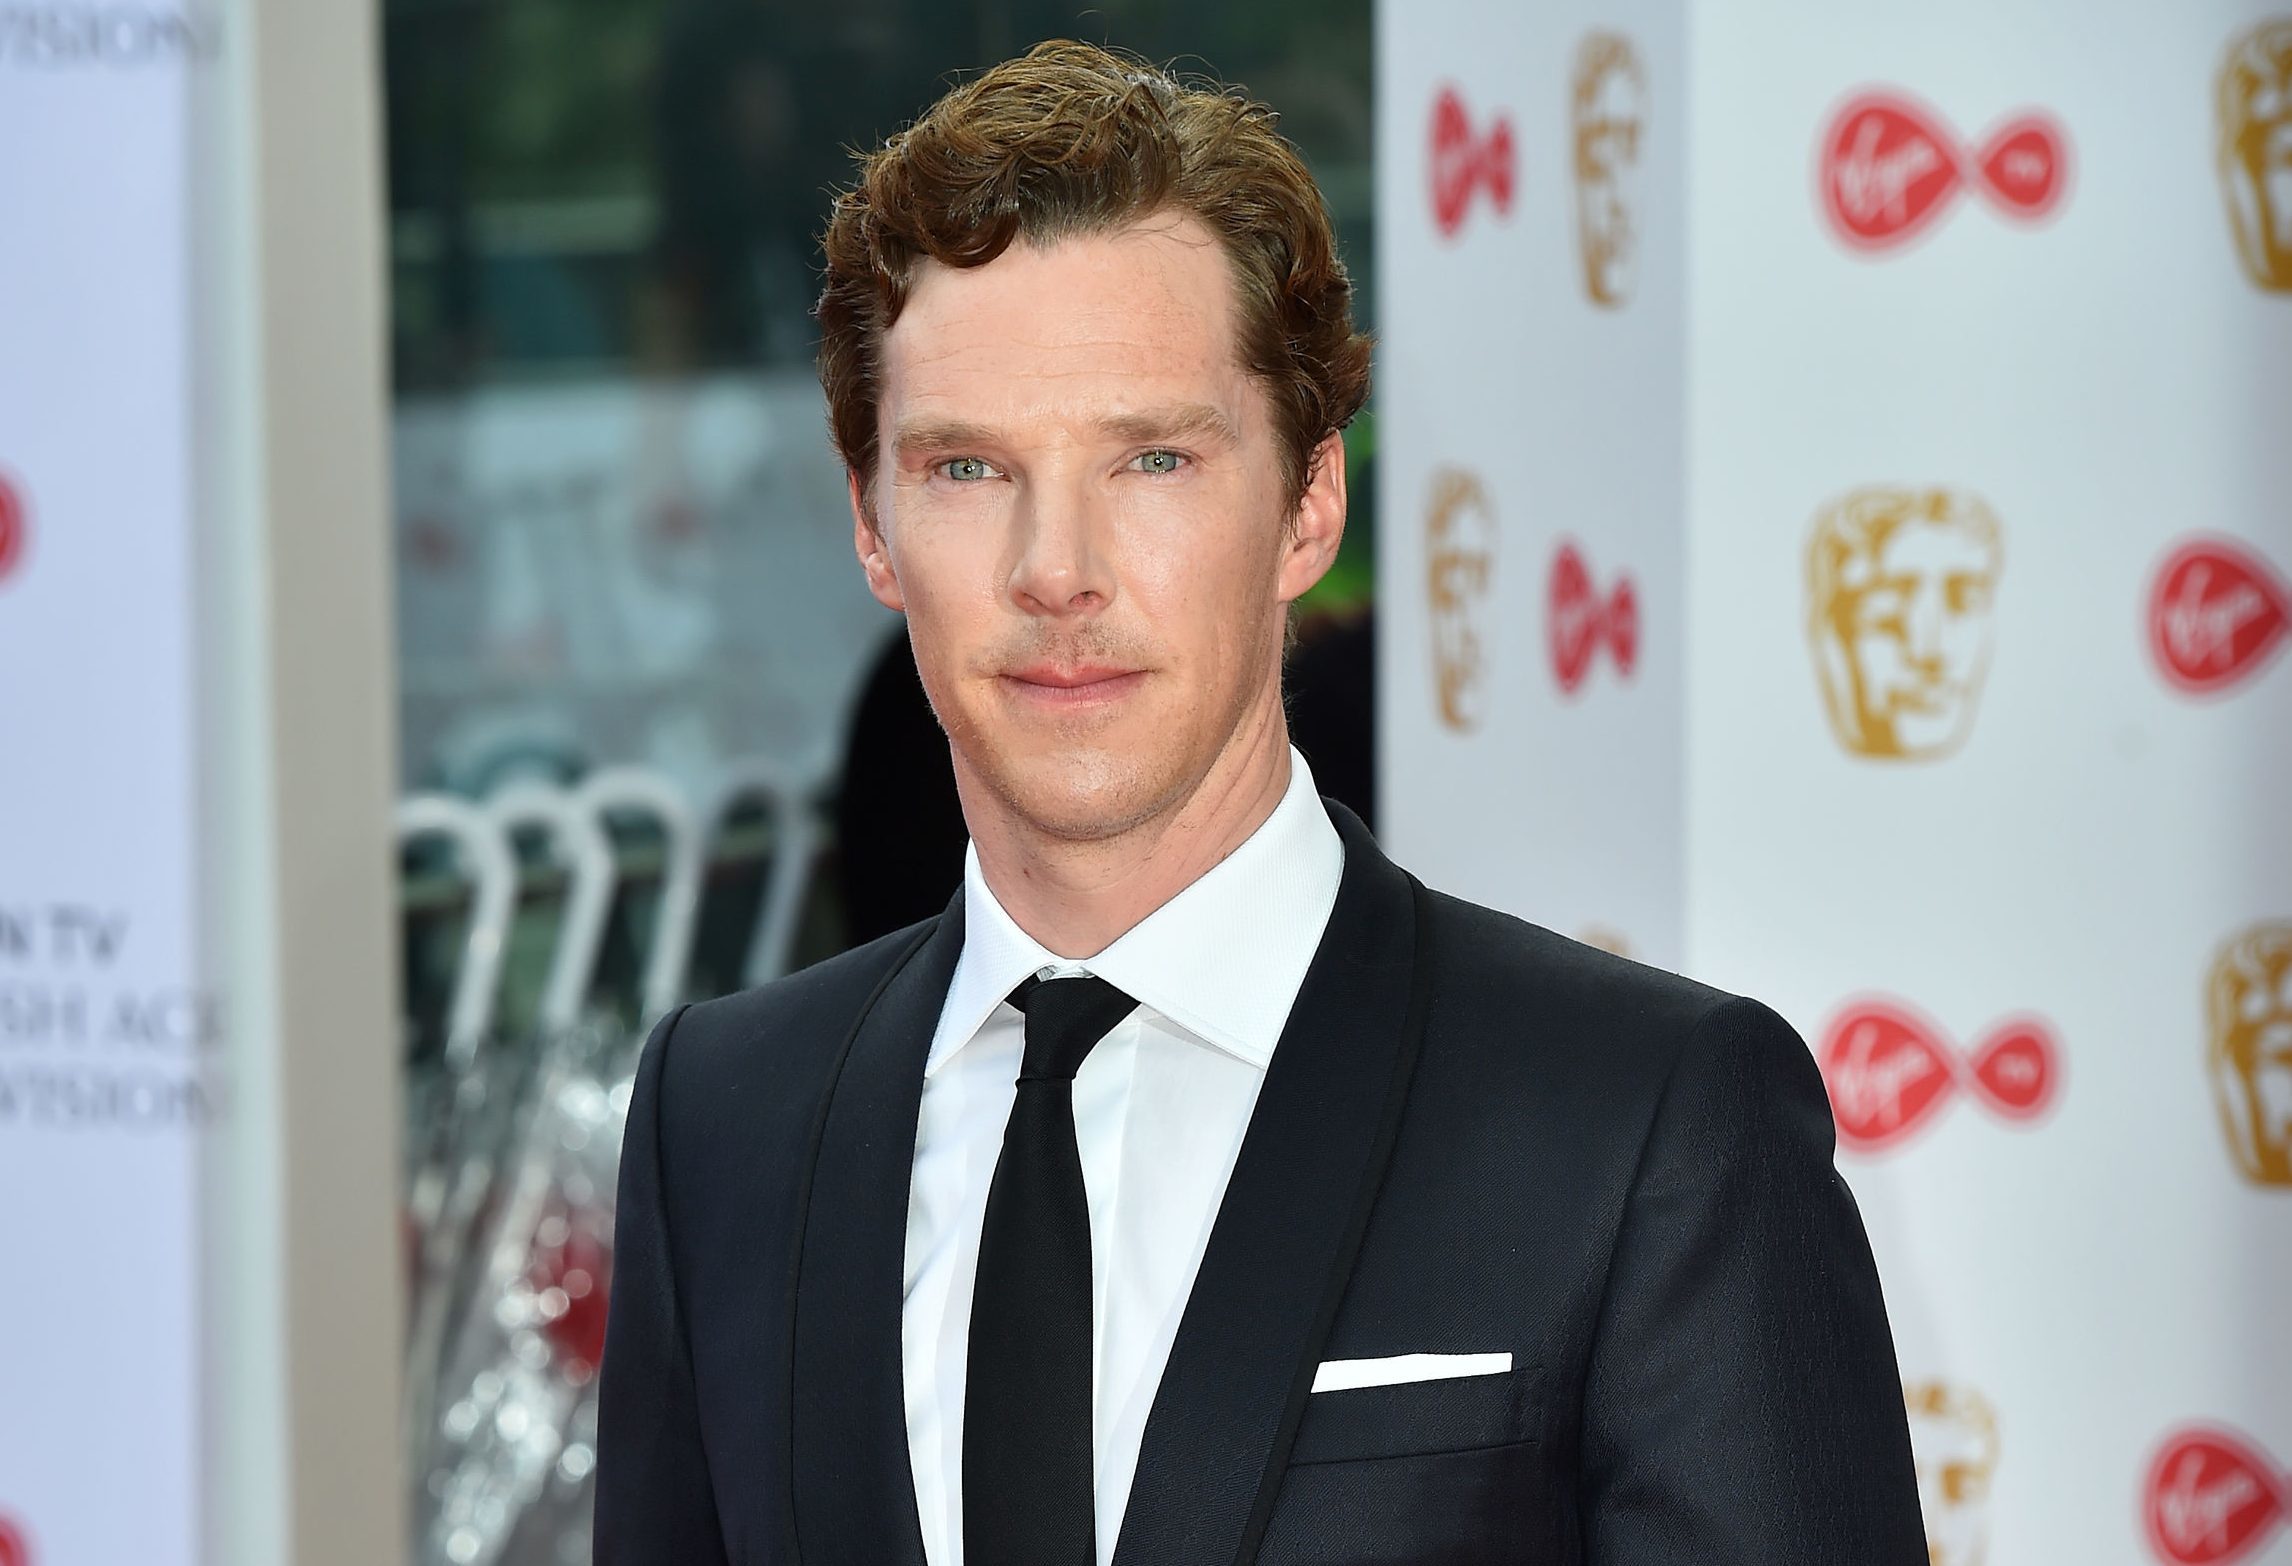 Actor Benedict Cumberbatch is coming to Glasgow to shoot scenes for Sky Atlantic drama Melrose (Tim P. Whitby/Getty Images)